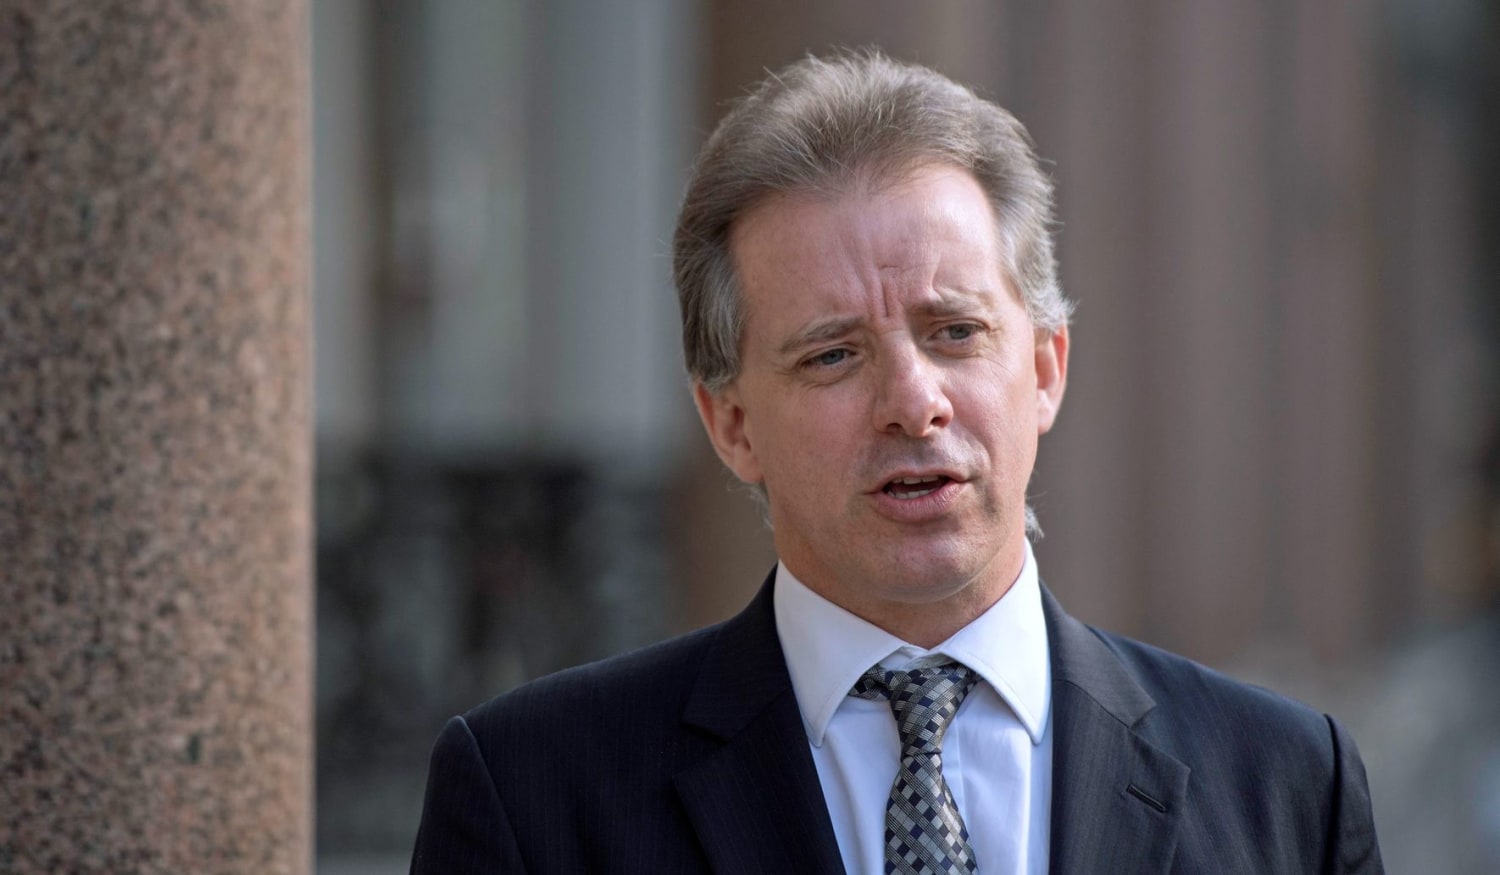 Anti-Trump dossier roils Capitol Hill anew after revelations about bias